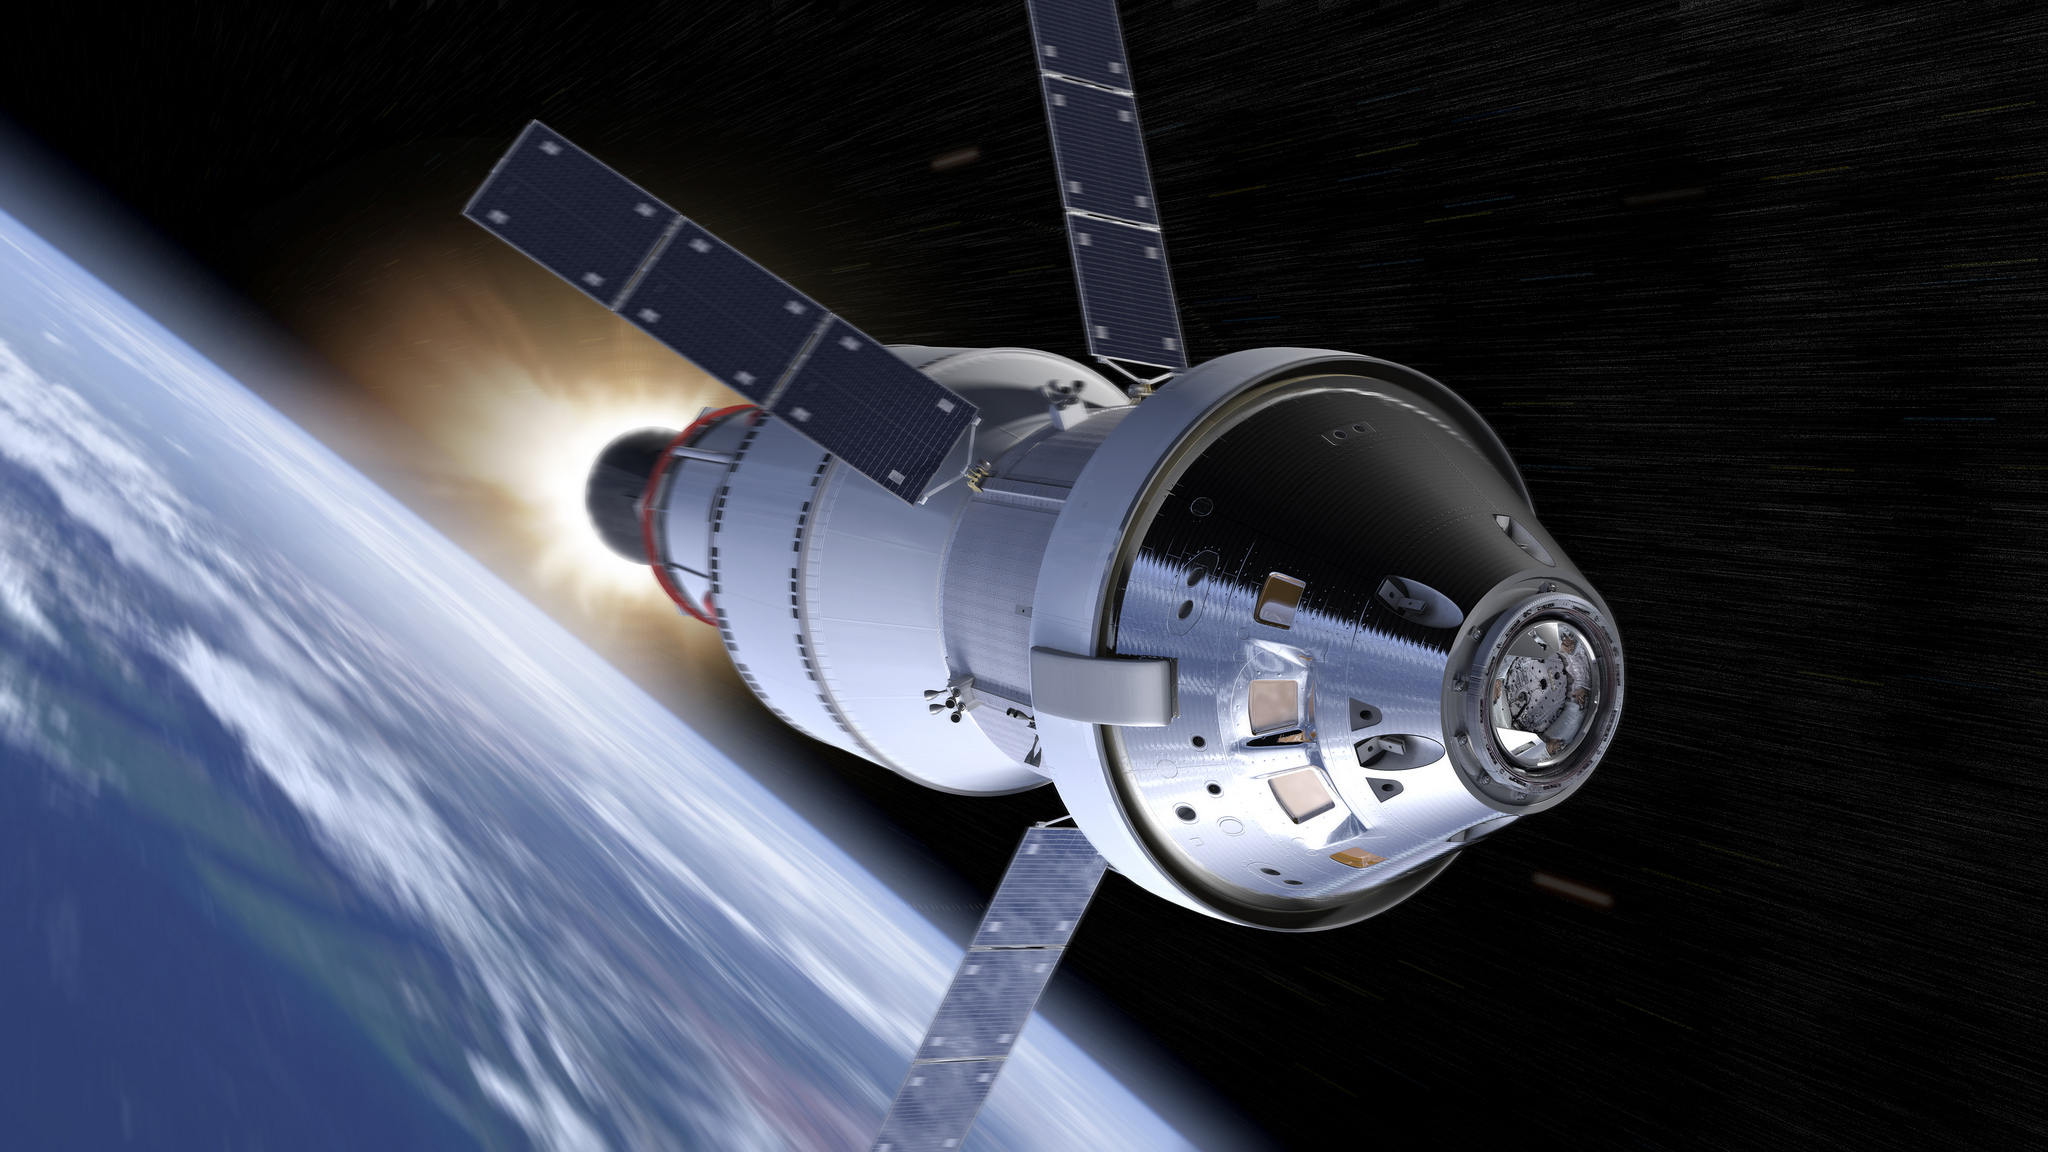 Orion spacecraft with Earth in the background